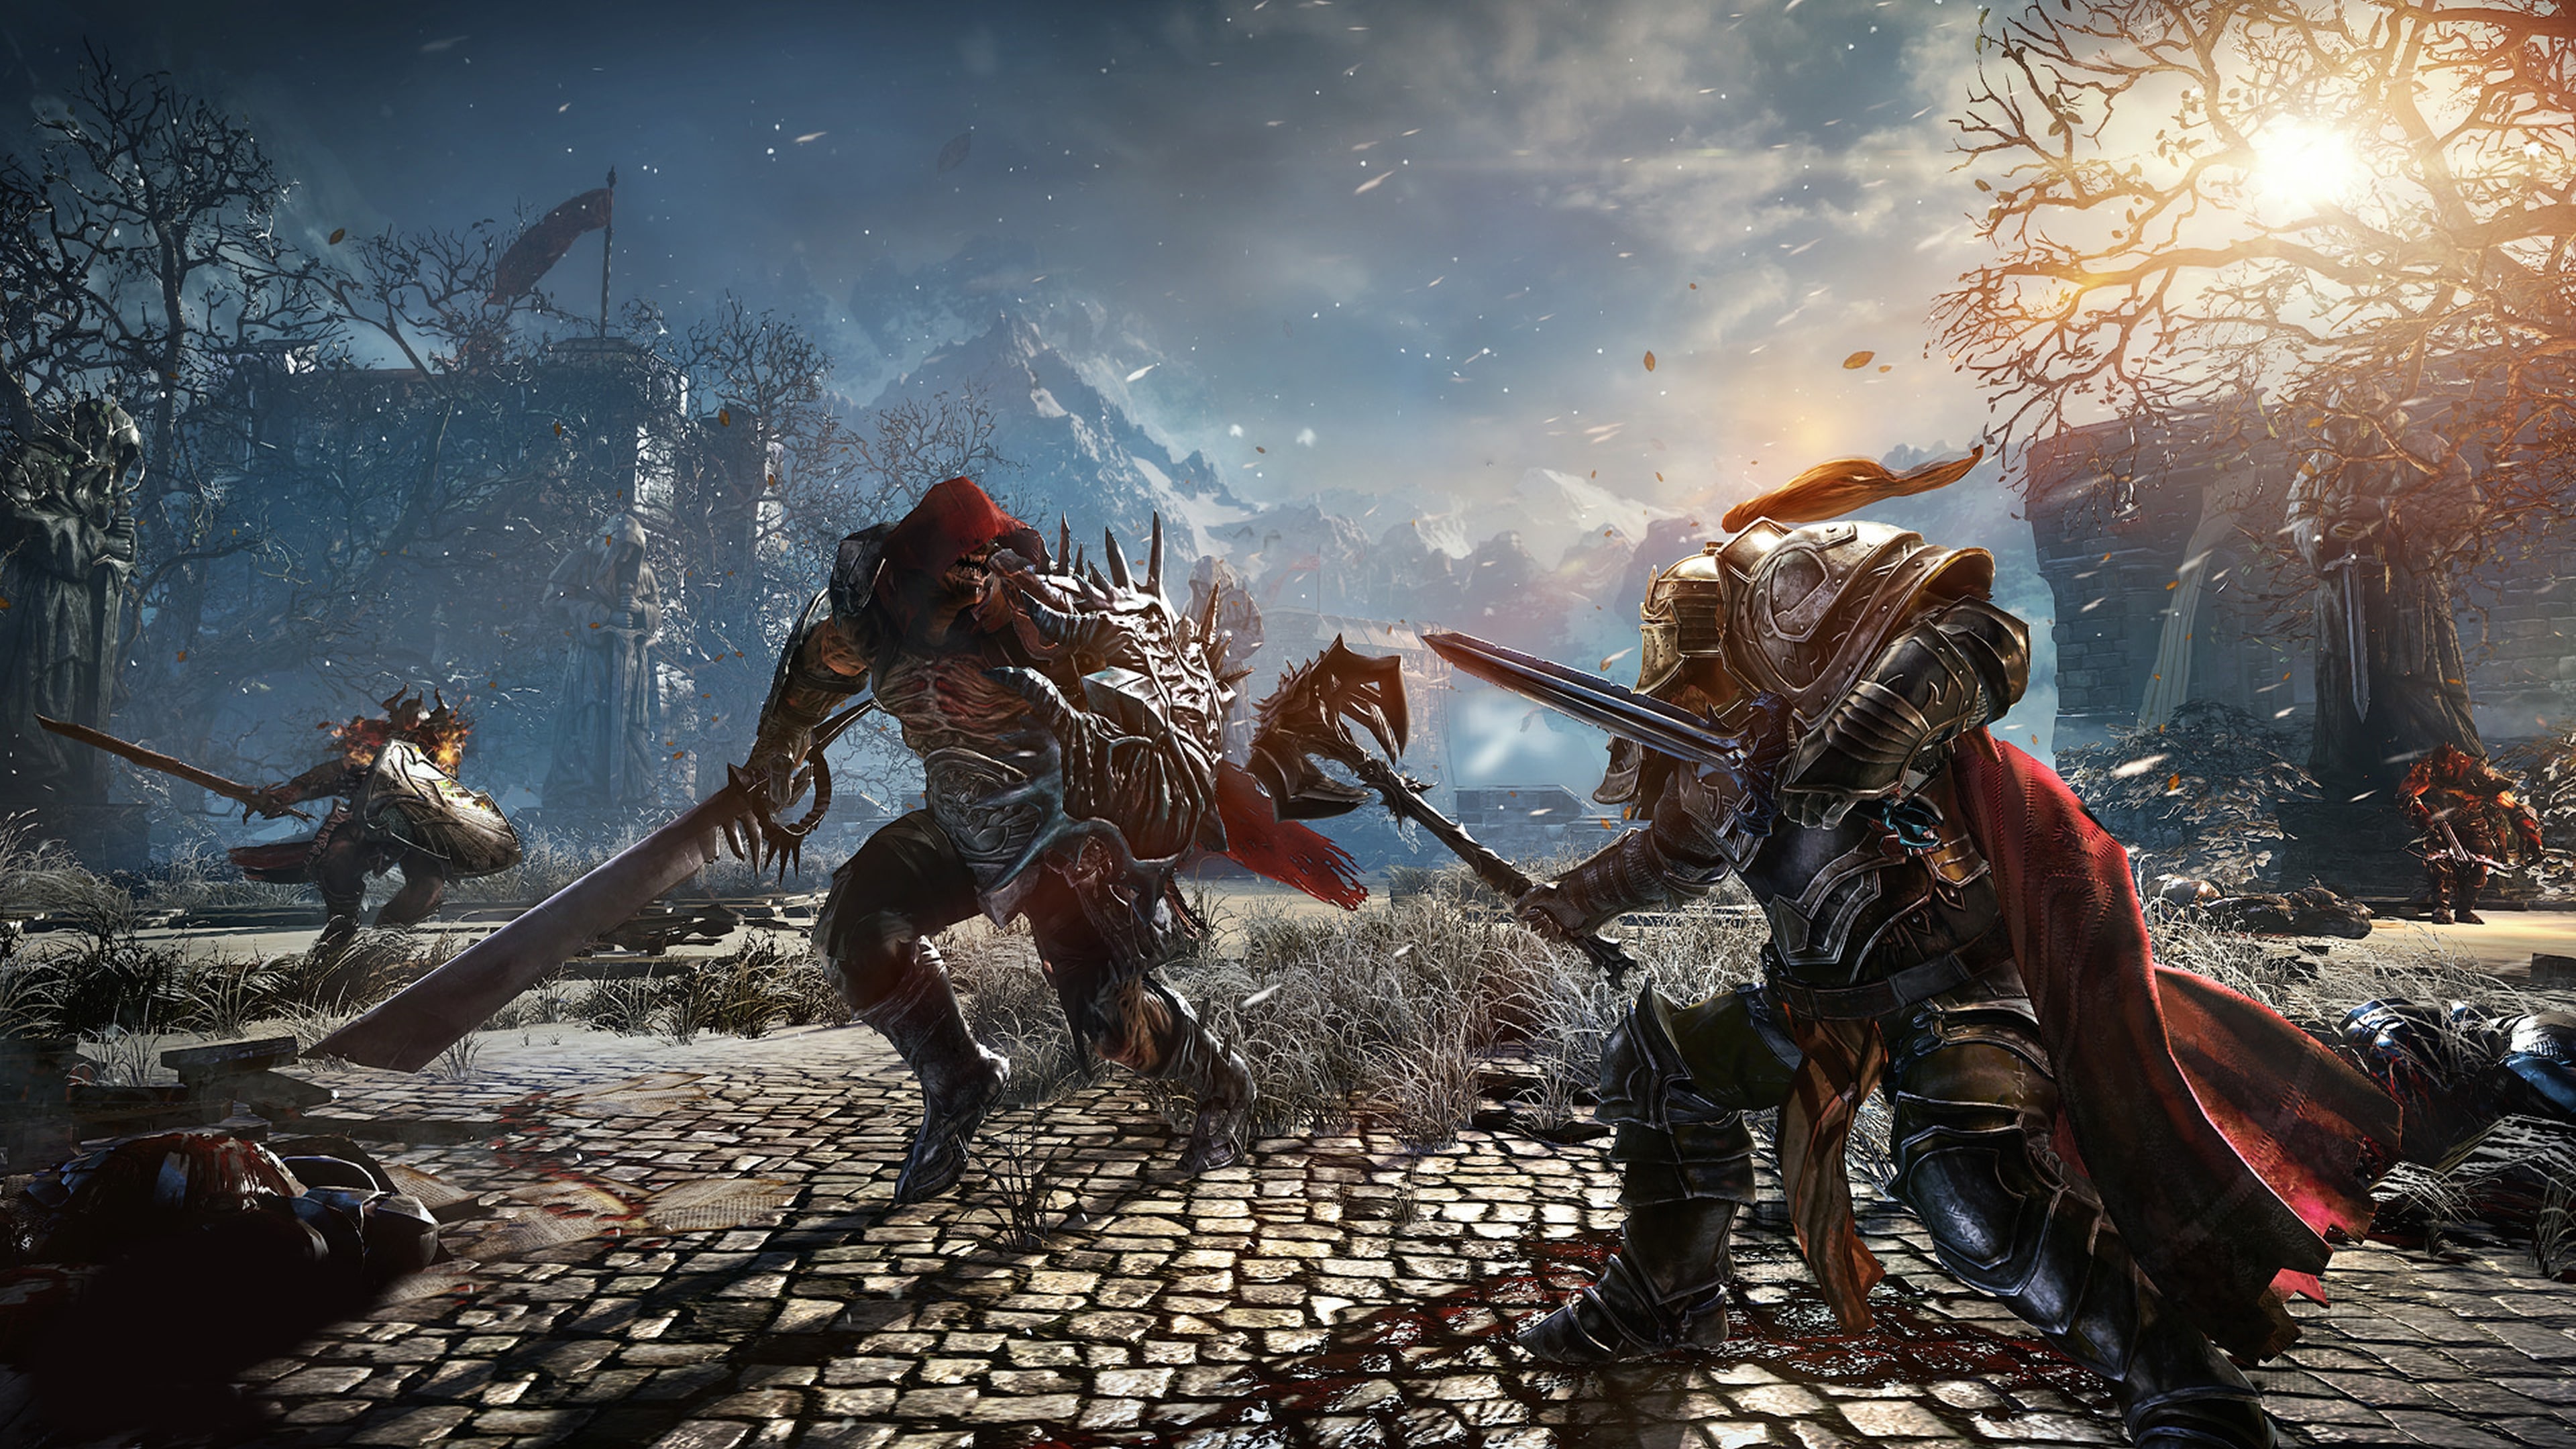 Игры. Игра Lords of the Fallen. Lords of the Fallen (ps4). Игра Lords of the Fallen 2. Lords of the Fallen геймплей.